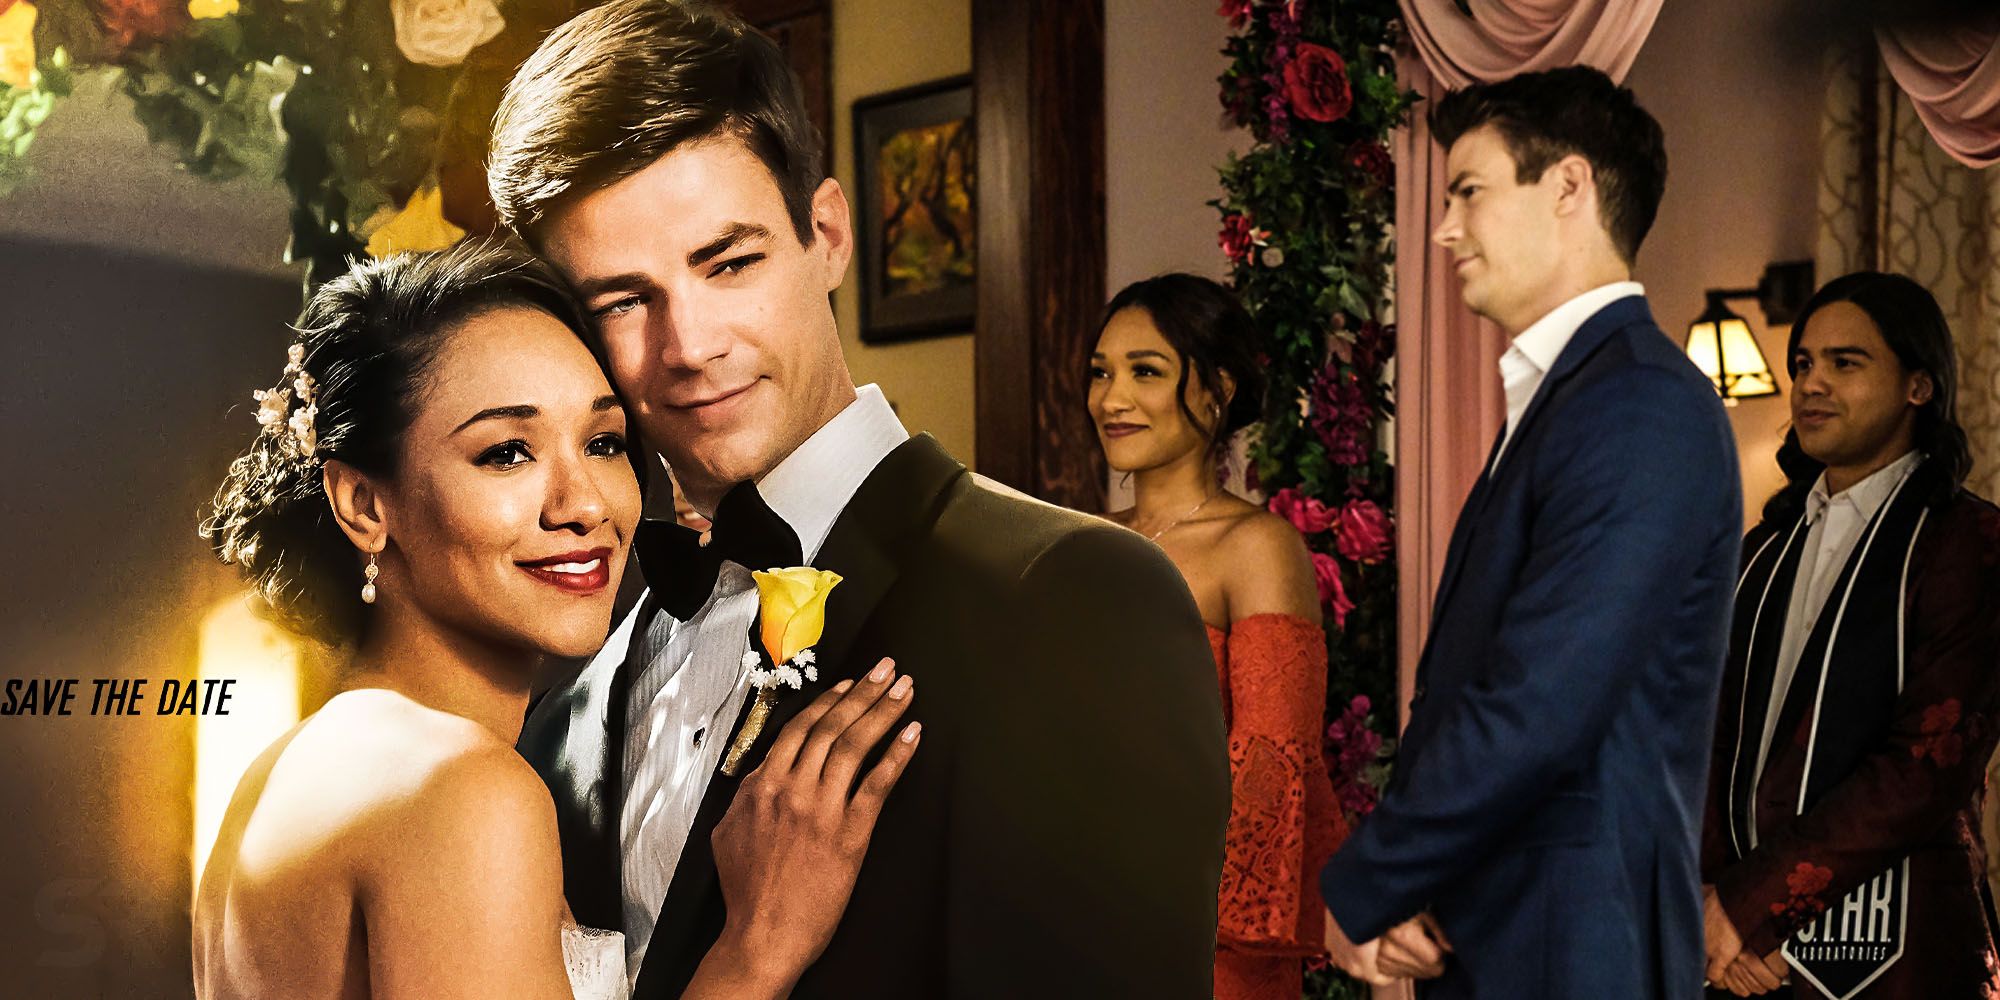 The flash season 7 fixes Barry and Iris wedding mistake arrowverse crossover